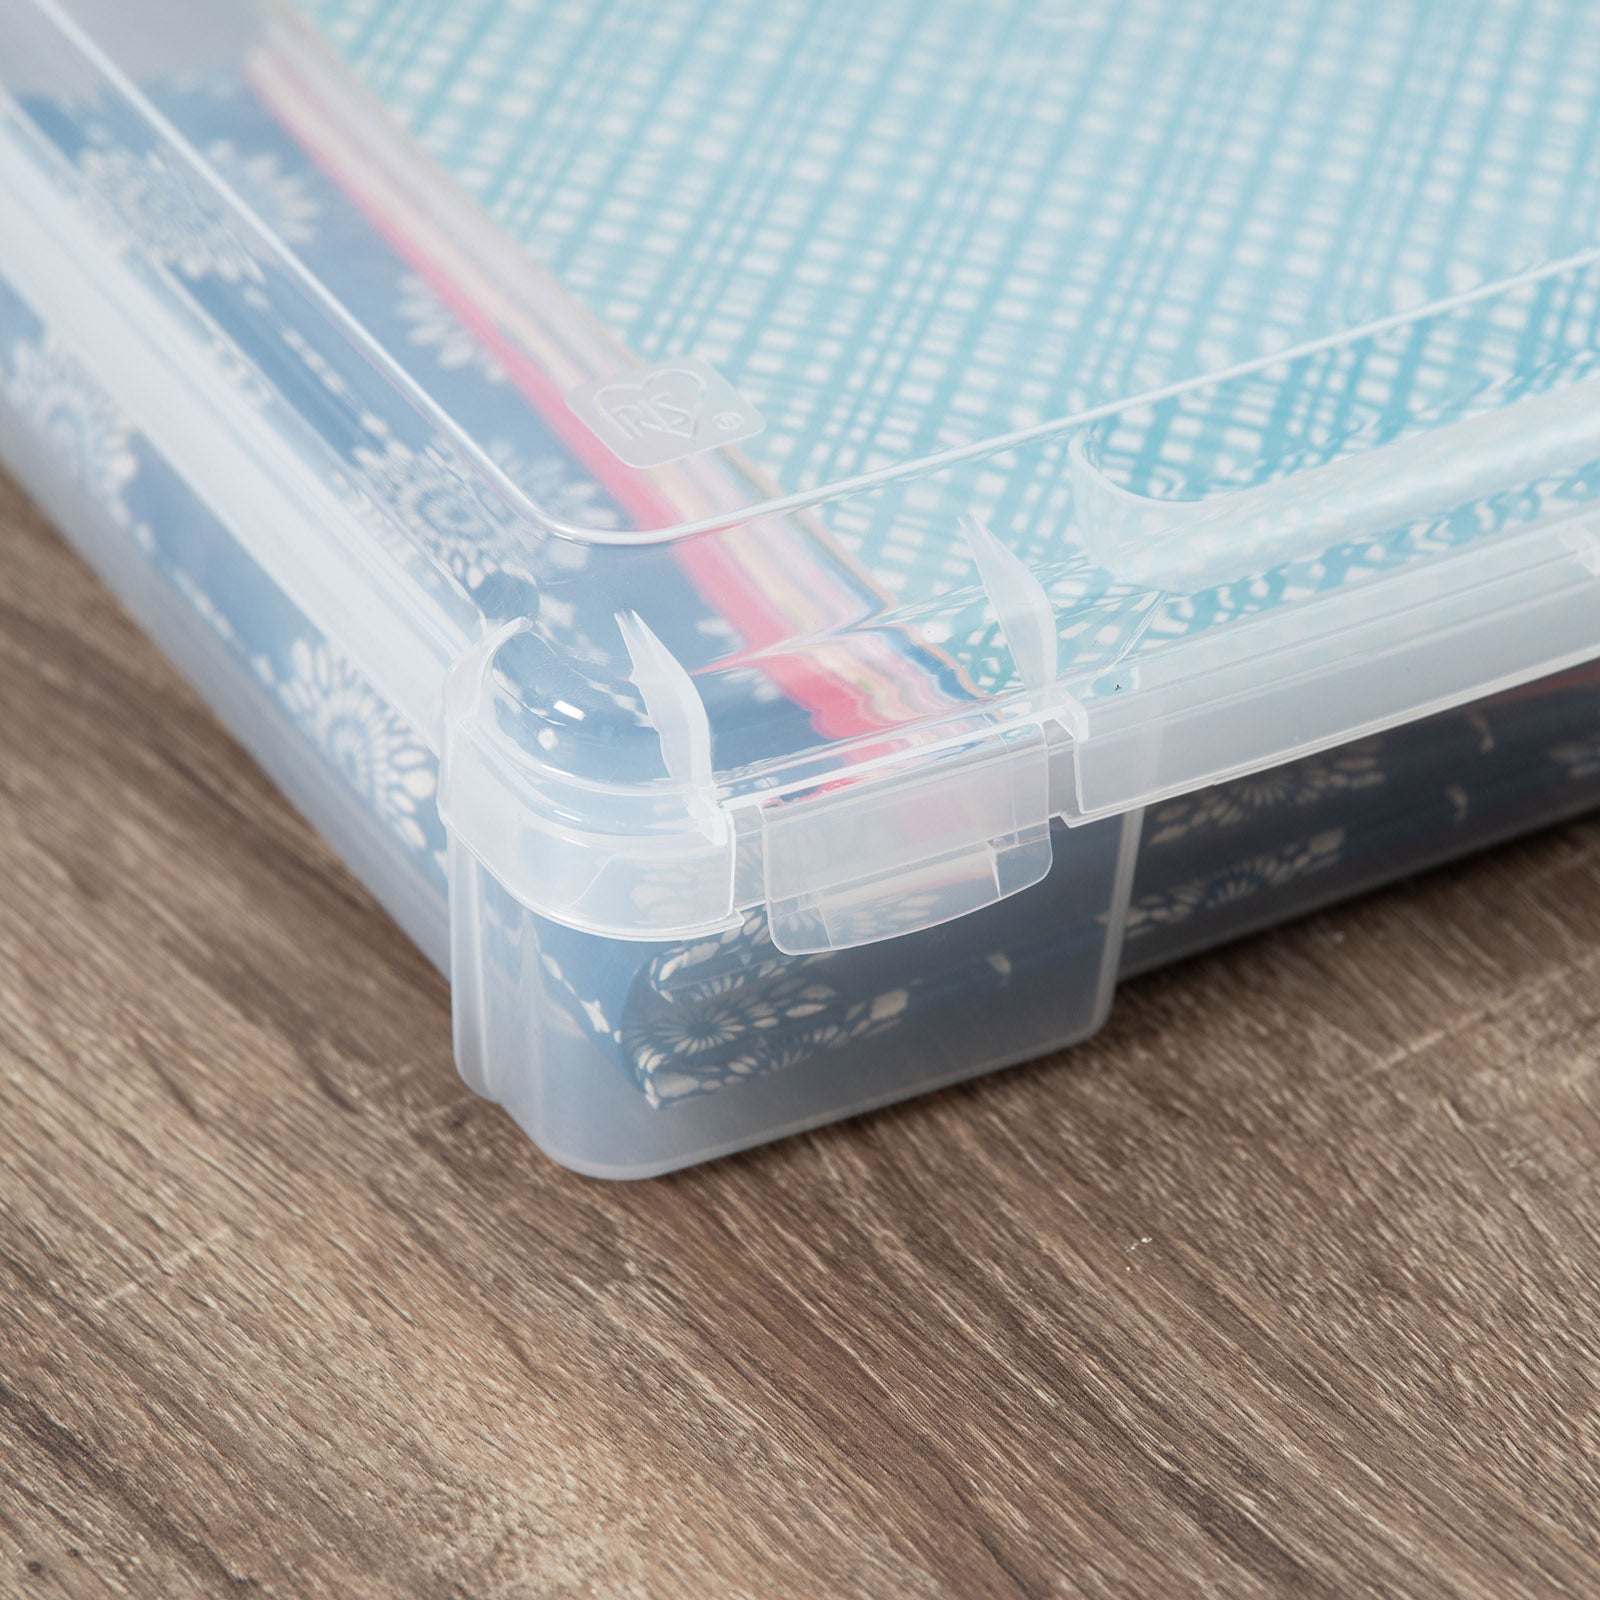 12 x 12 Clear Scrapbook Case by Simply Tidy™